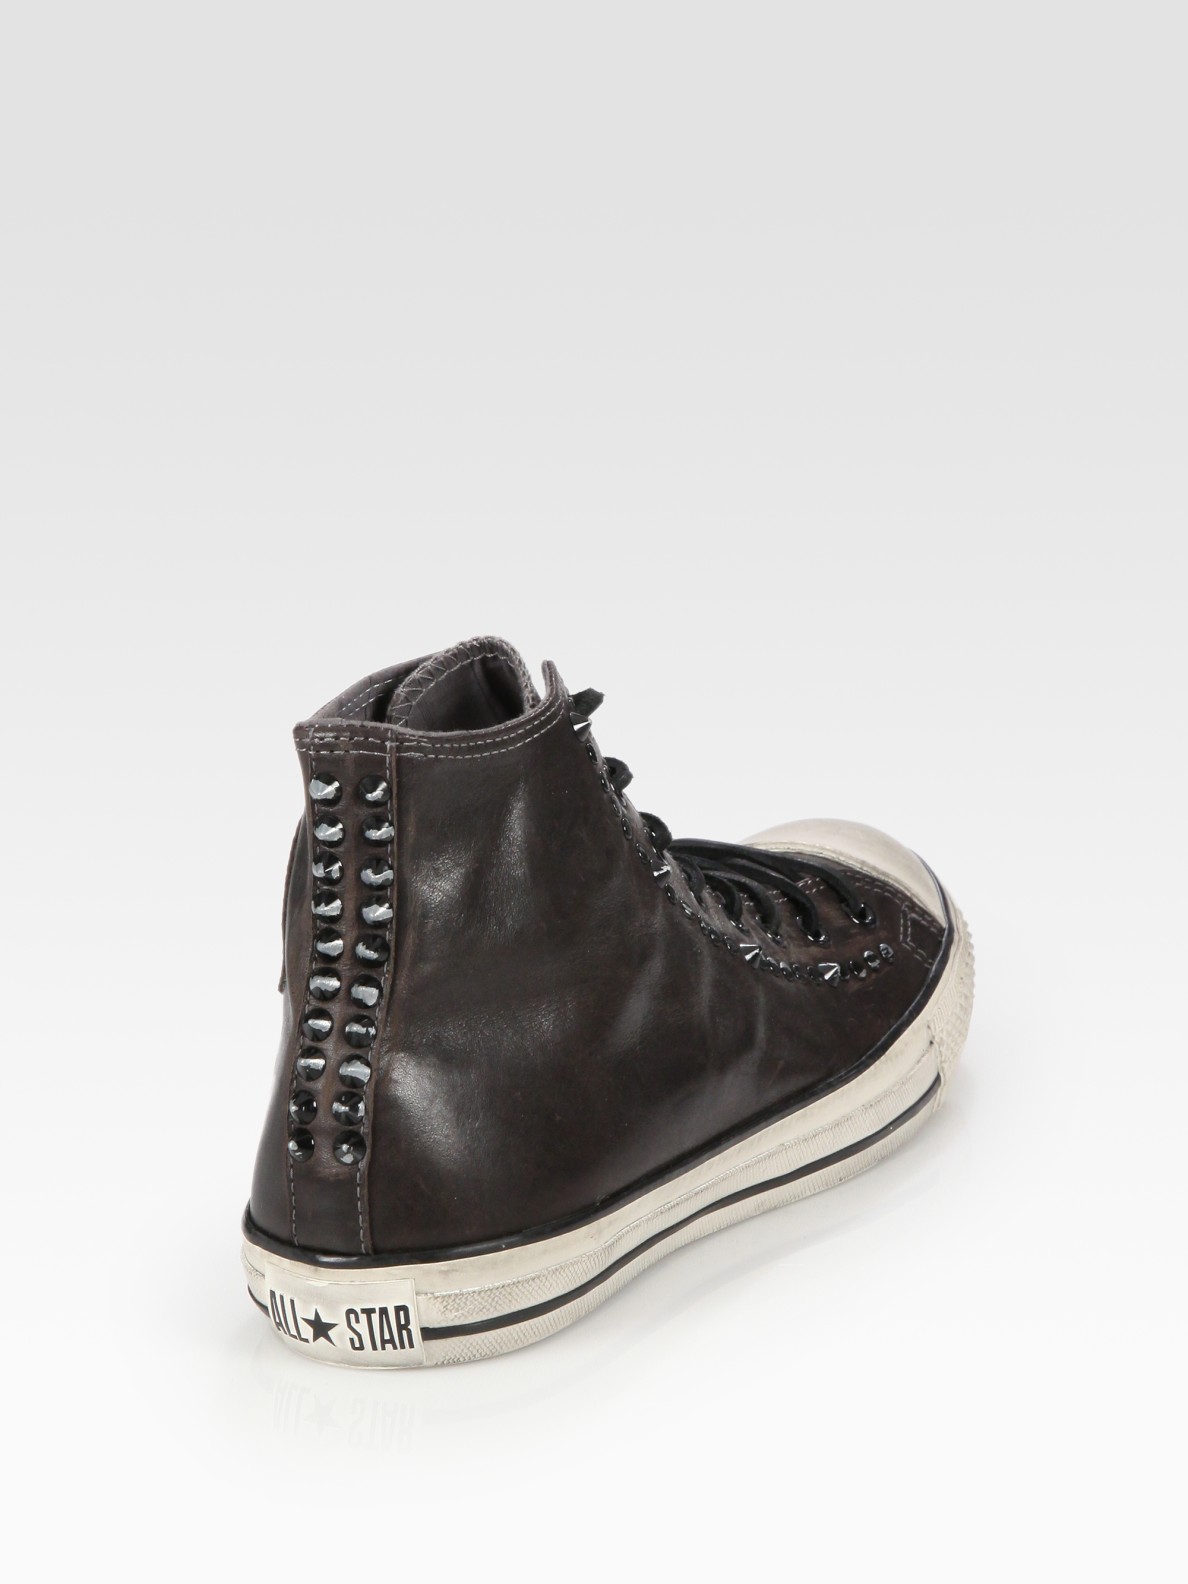 Converse John Varvatos Studded Leather High-tops in Black for Men | Lyst